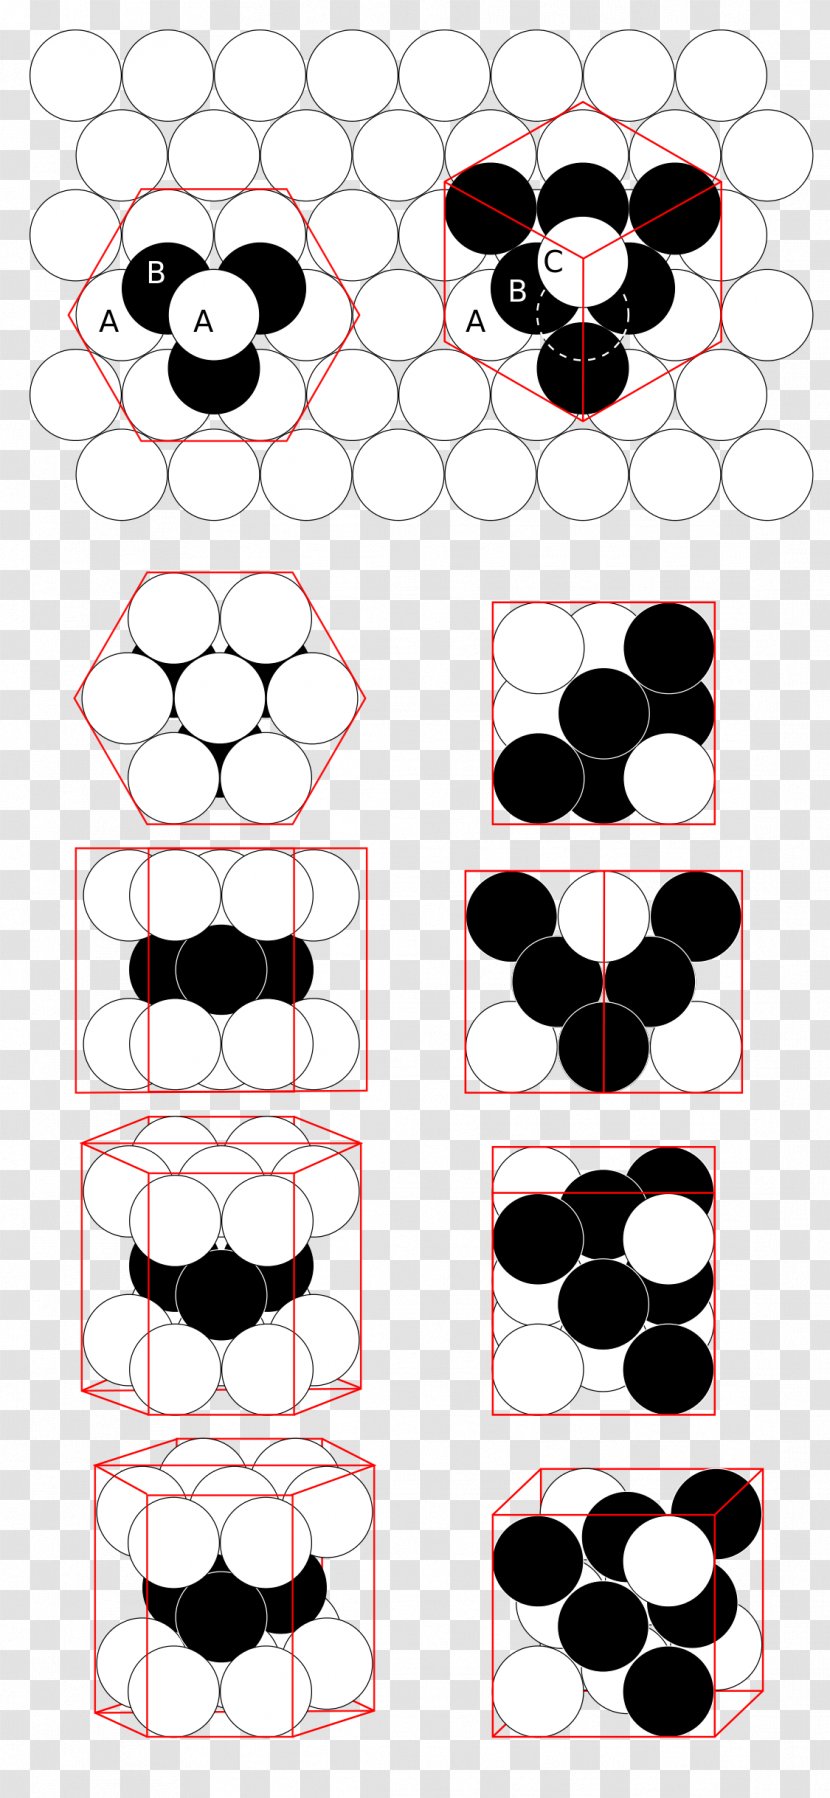 Close-packing Of Equal Spheres Packing Problems Sphere Cubic Crystal System Atomic Factor - Area - Hexagonal Box Transparent PNG